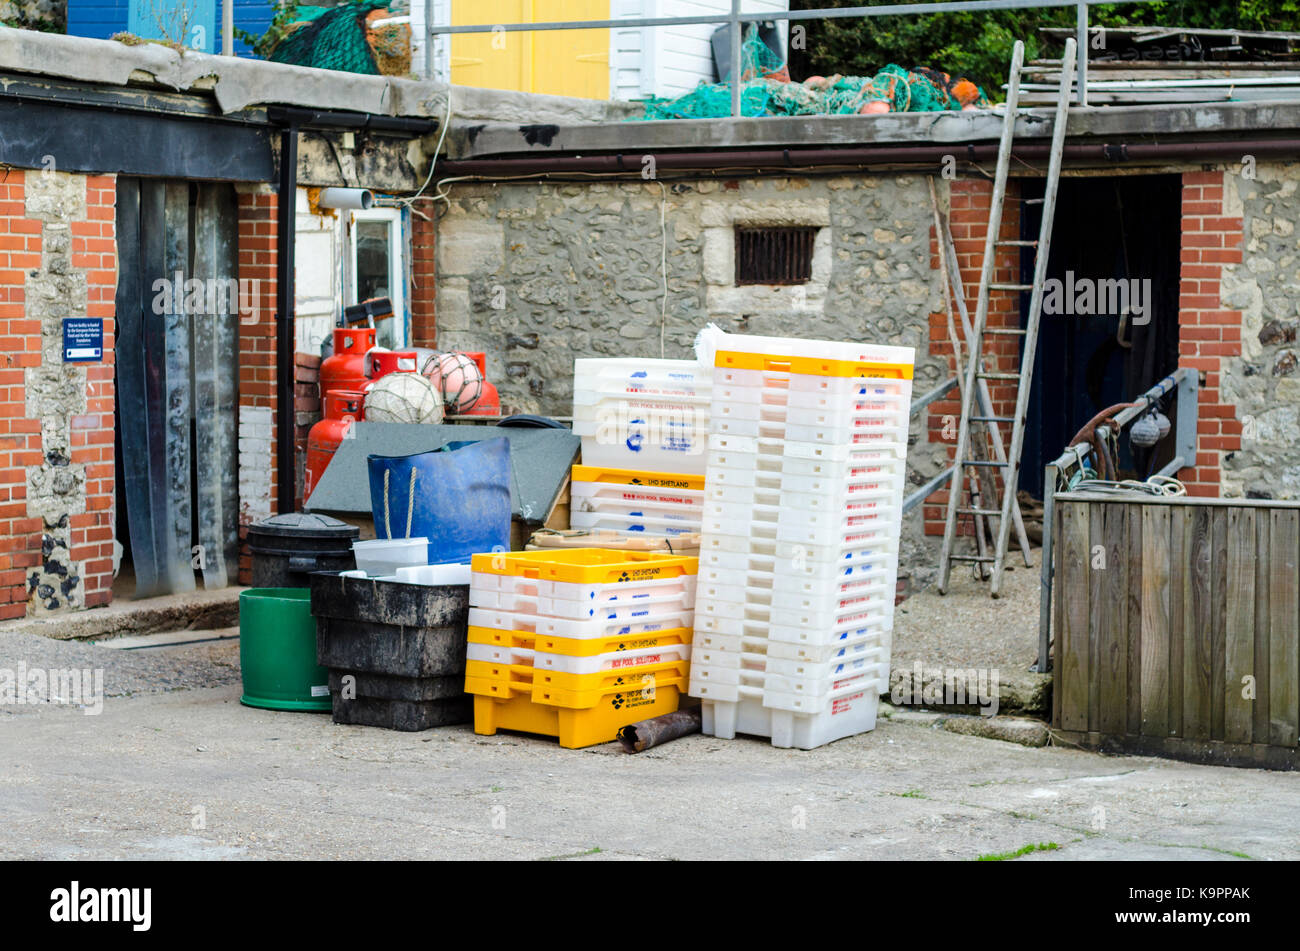 Boxes for fish and fishing equipment near the beach in Beer, Devon, UK Stock Photo